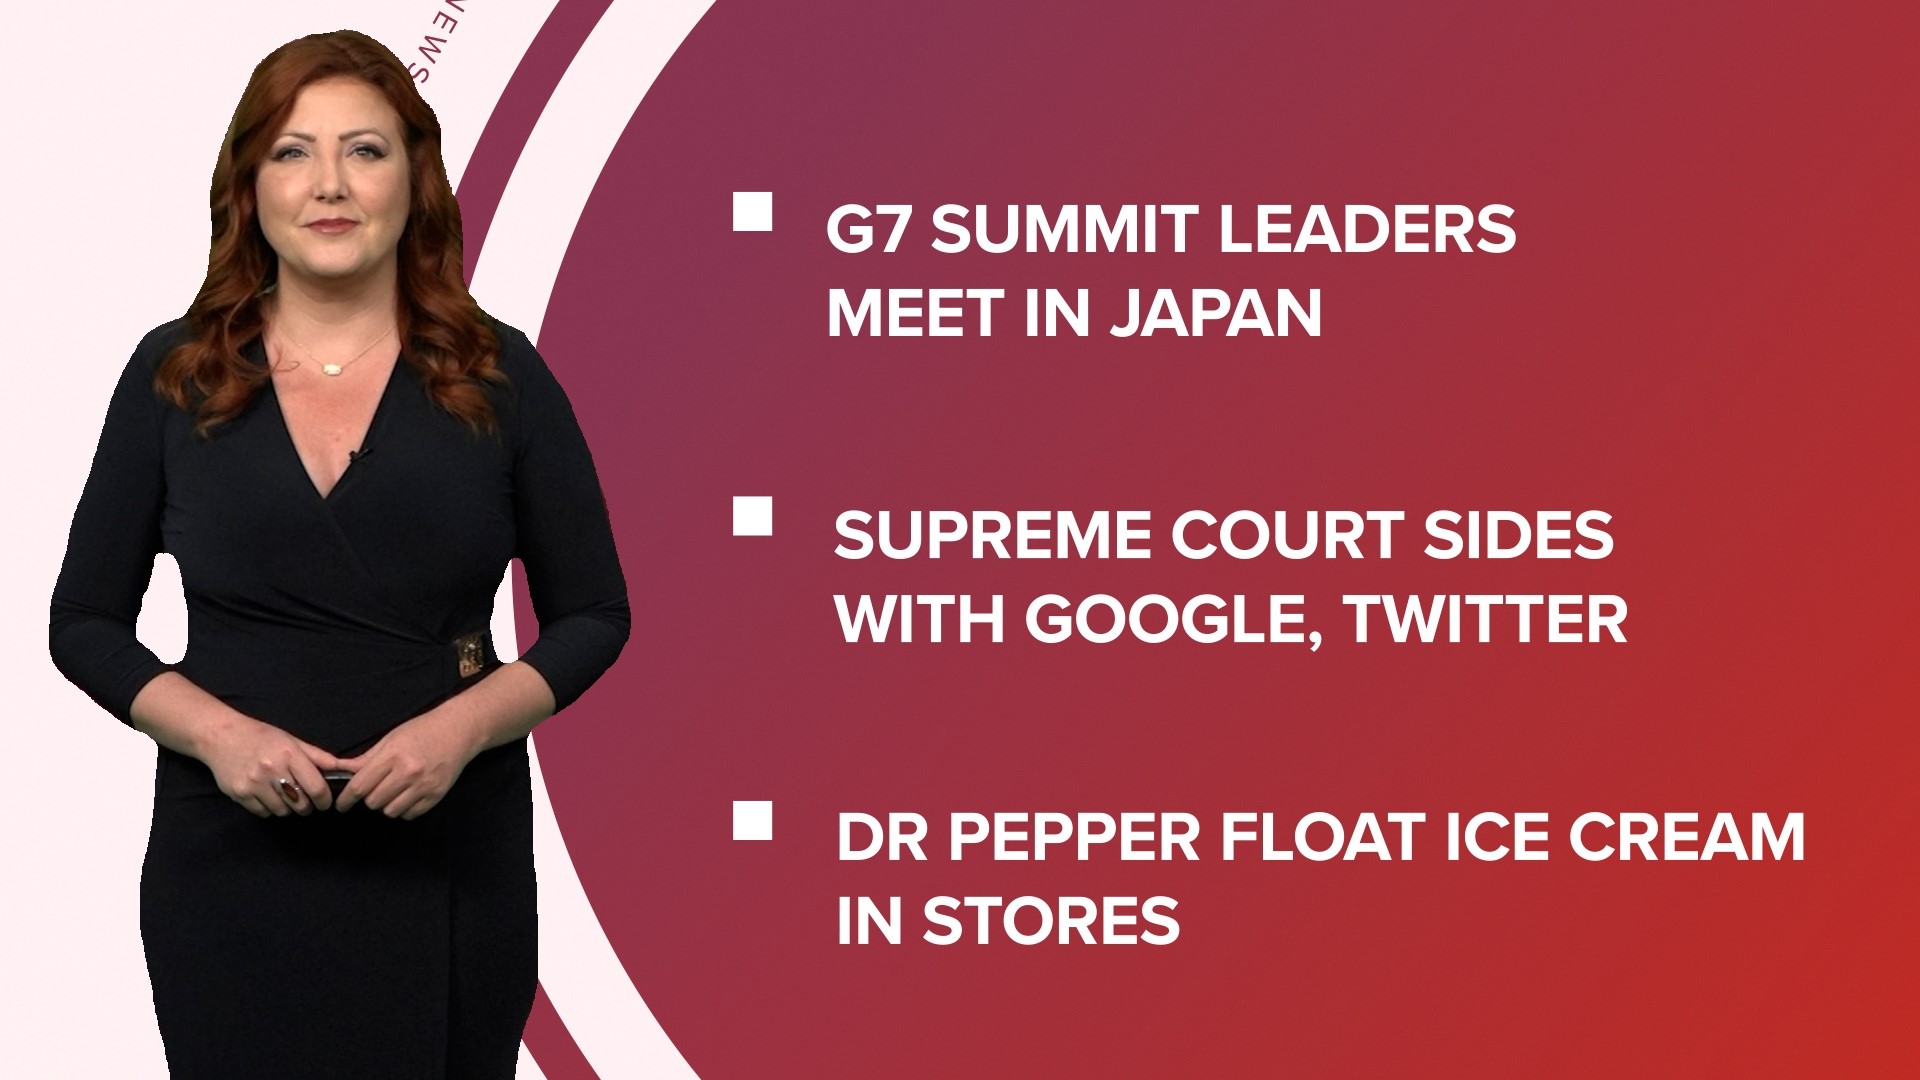 A look at what is happening in the news from the G7 Summit in Japan to the Supreme Court siding with Google and Twitter and a new Dr Pepper float ice cream.